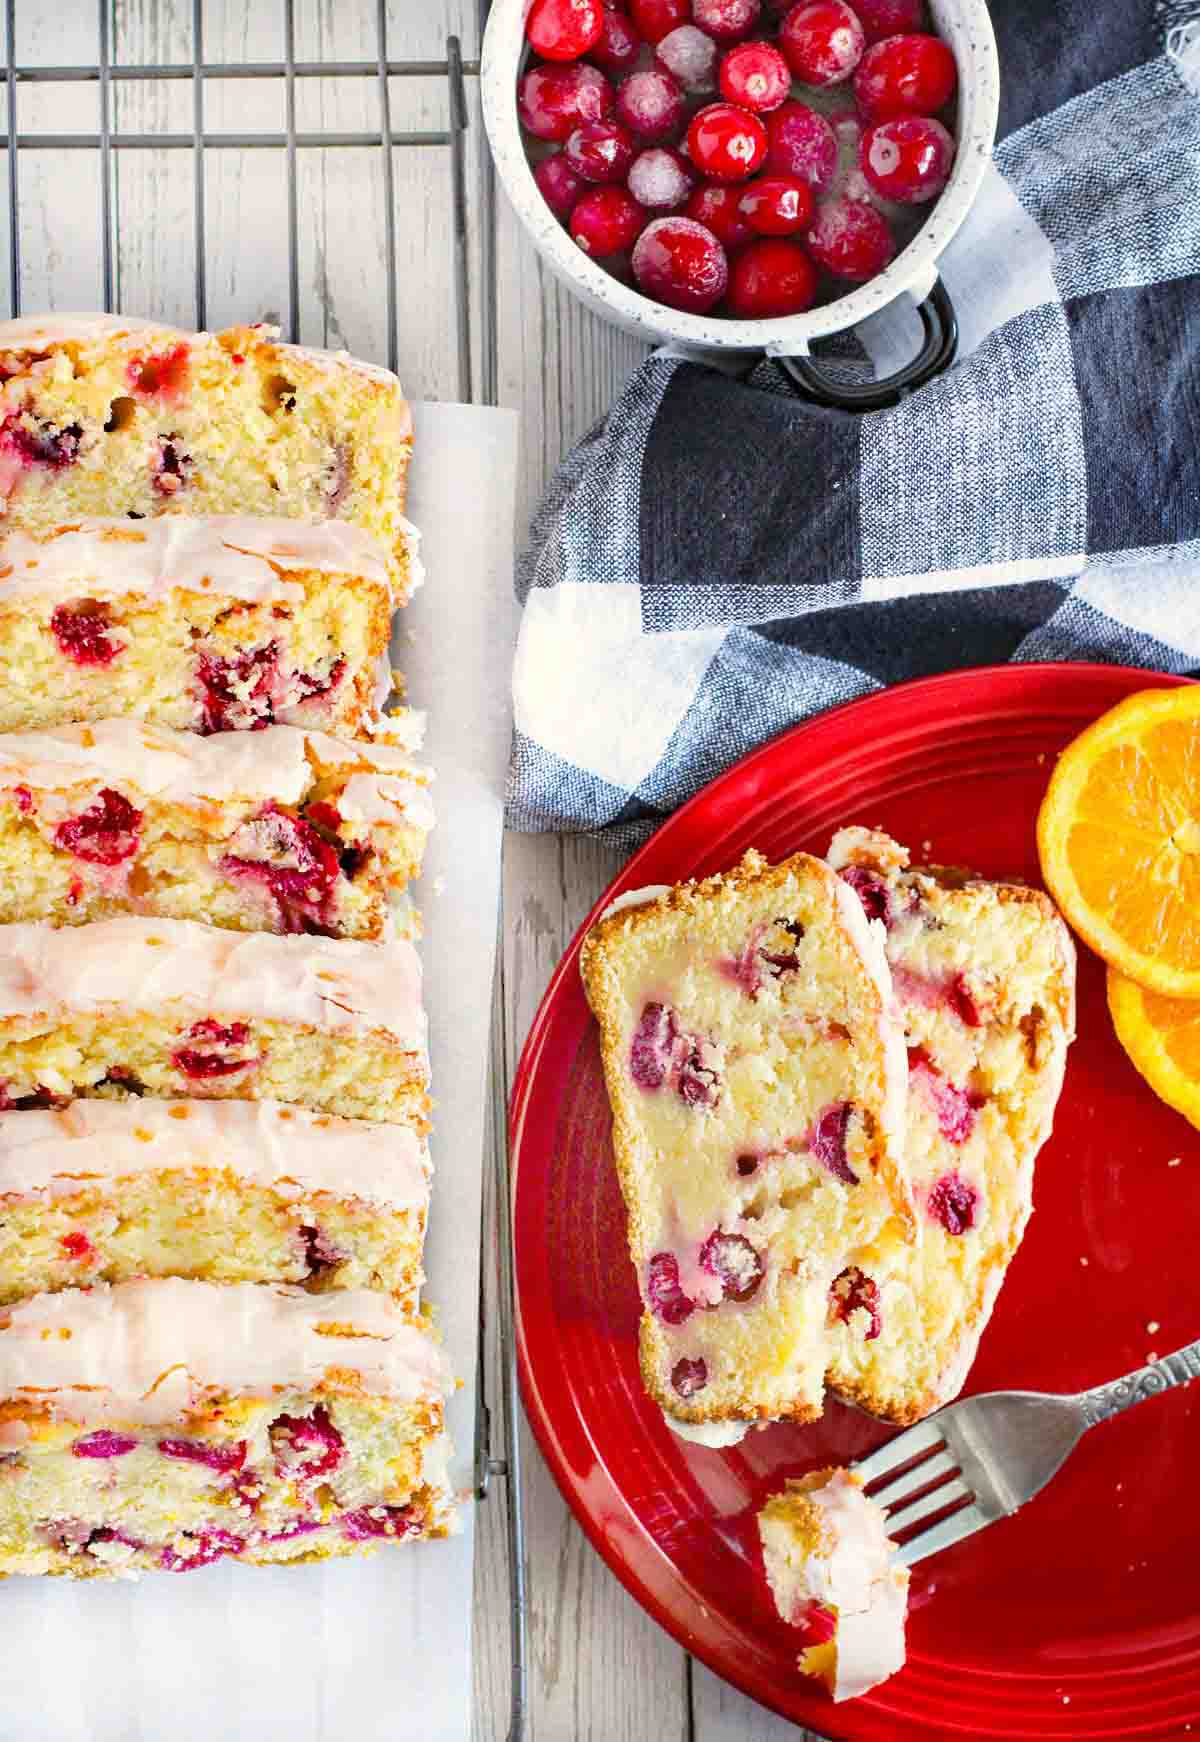 Slices of cranberry orange bread on a wire rack next to slices on a red plate.